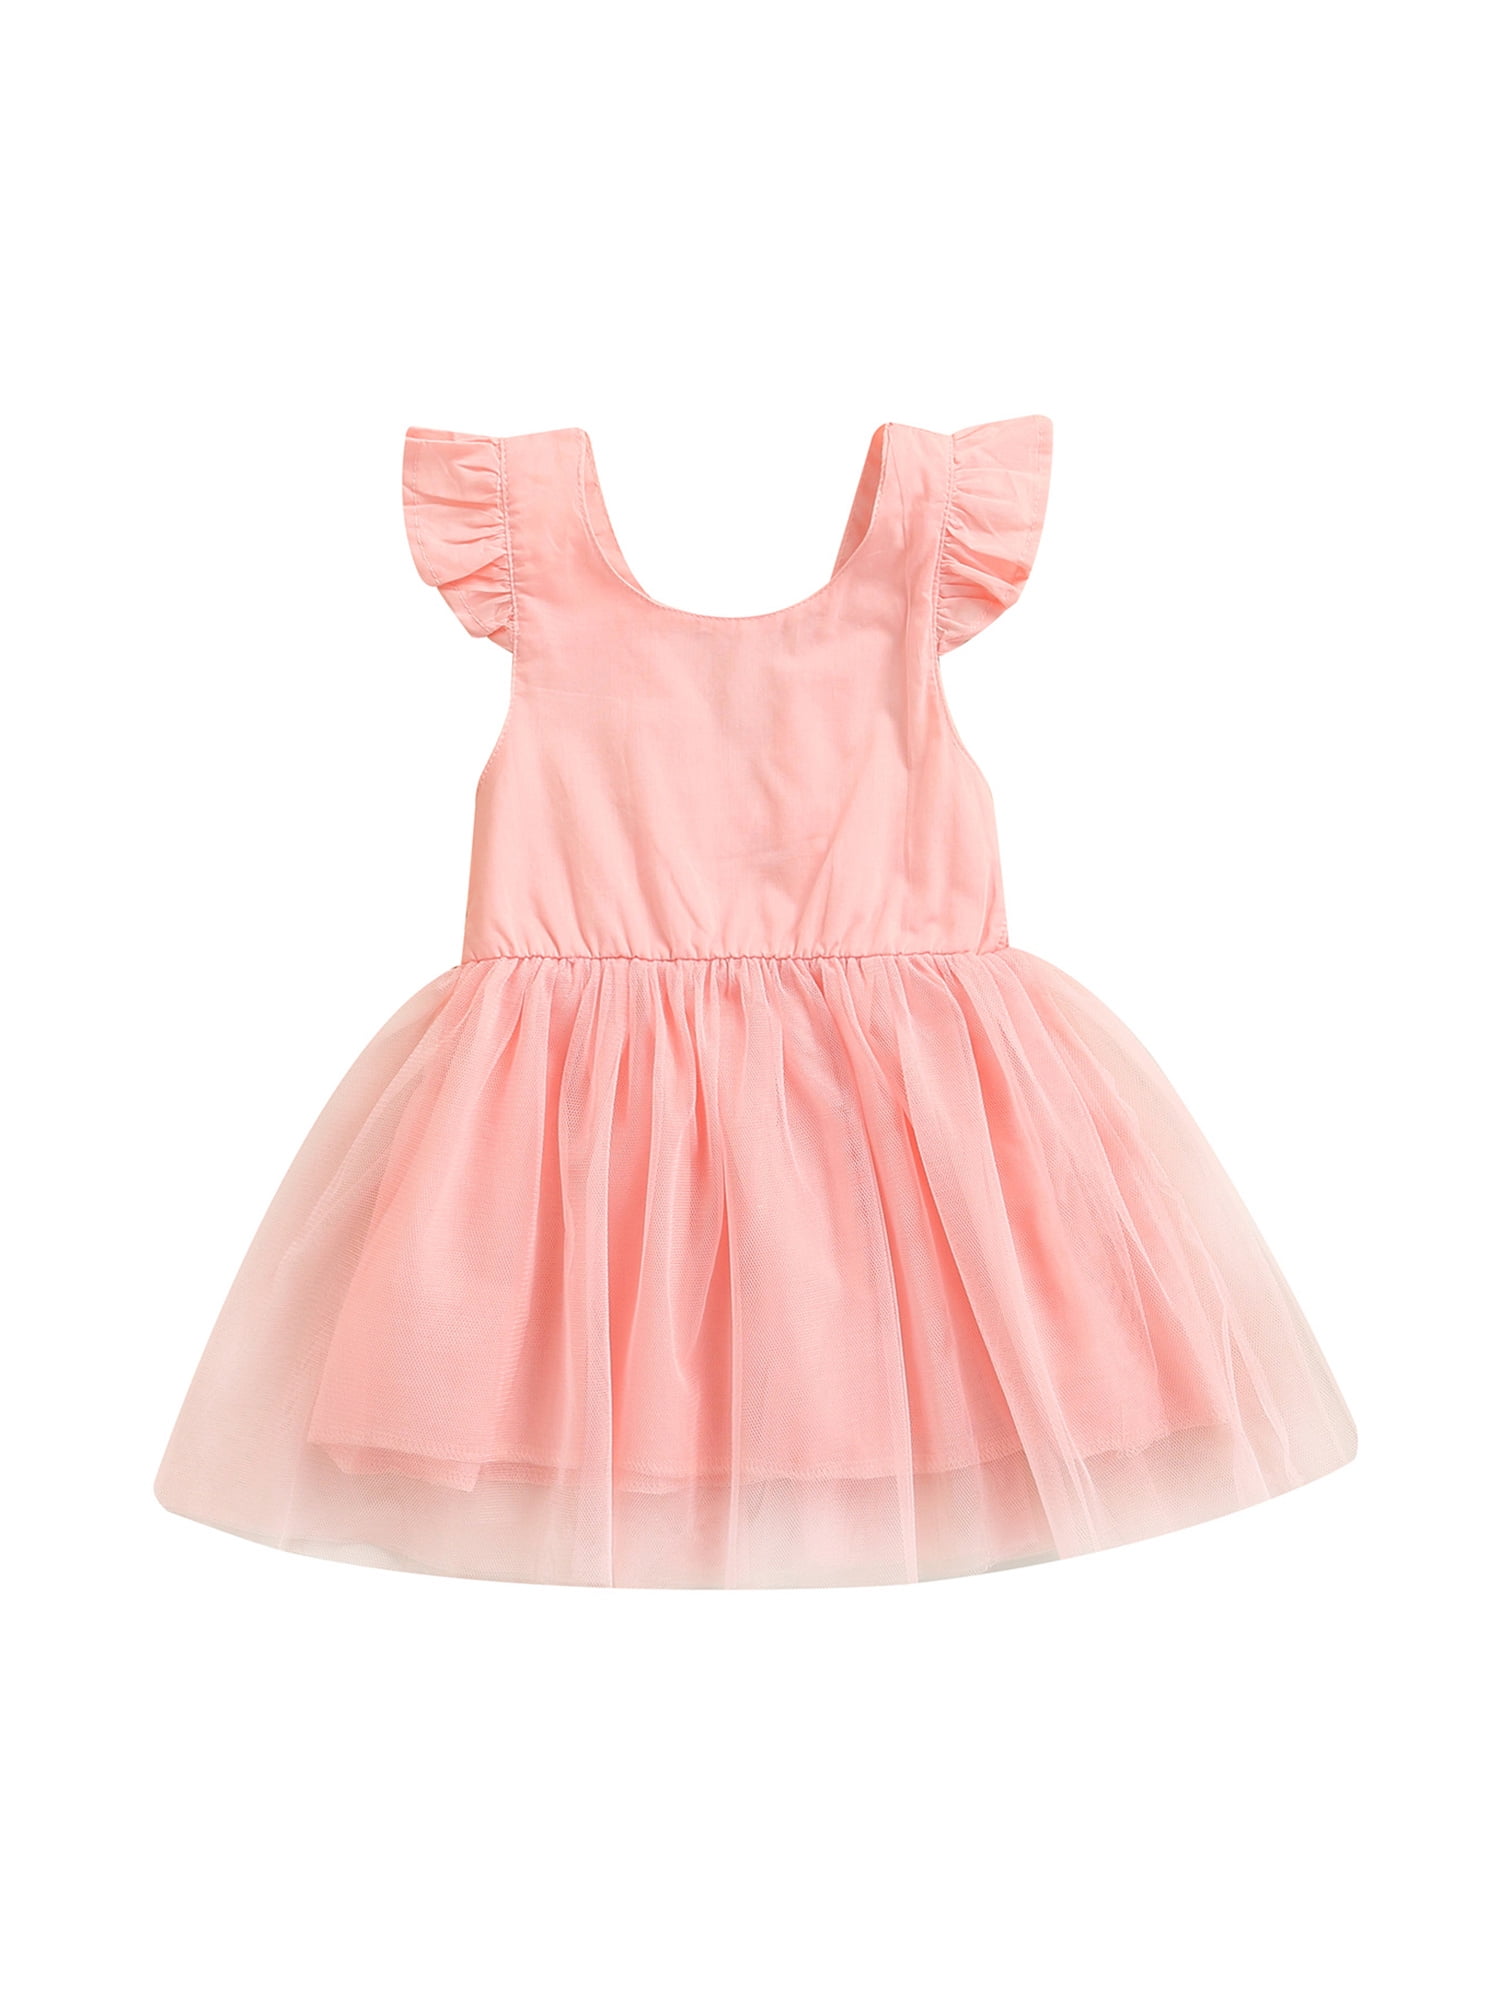 wybzd Baby Girls Fly Sleeve Dress Fashion Solid Color Round Neck Mesh Yarn  Stitching A-line Dress Pink 4-5 Years 